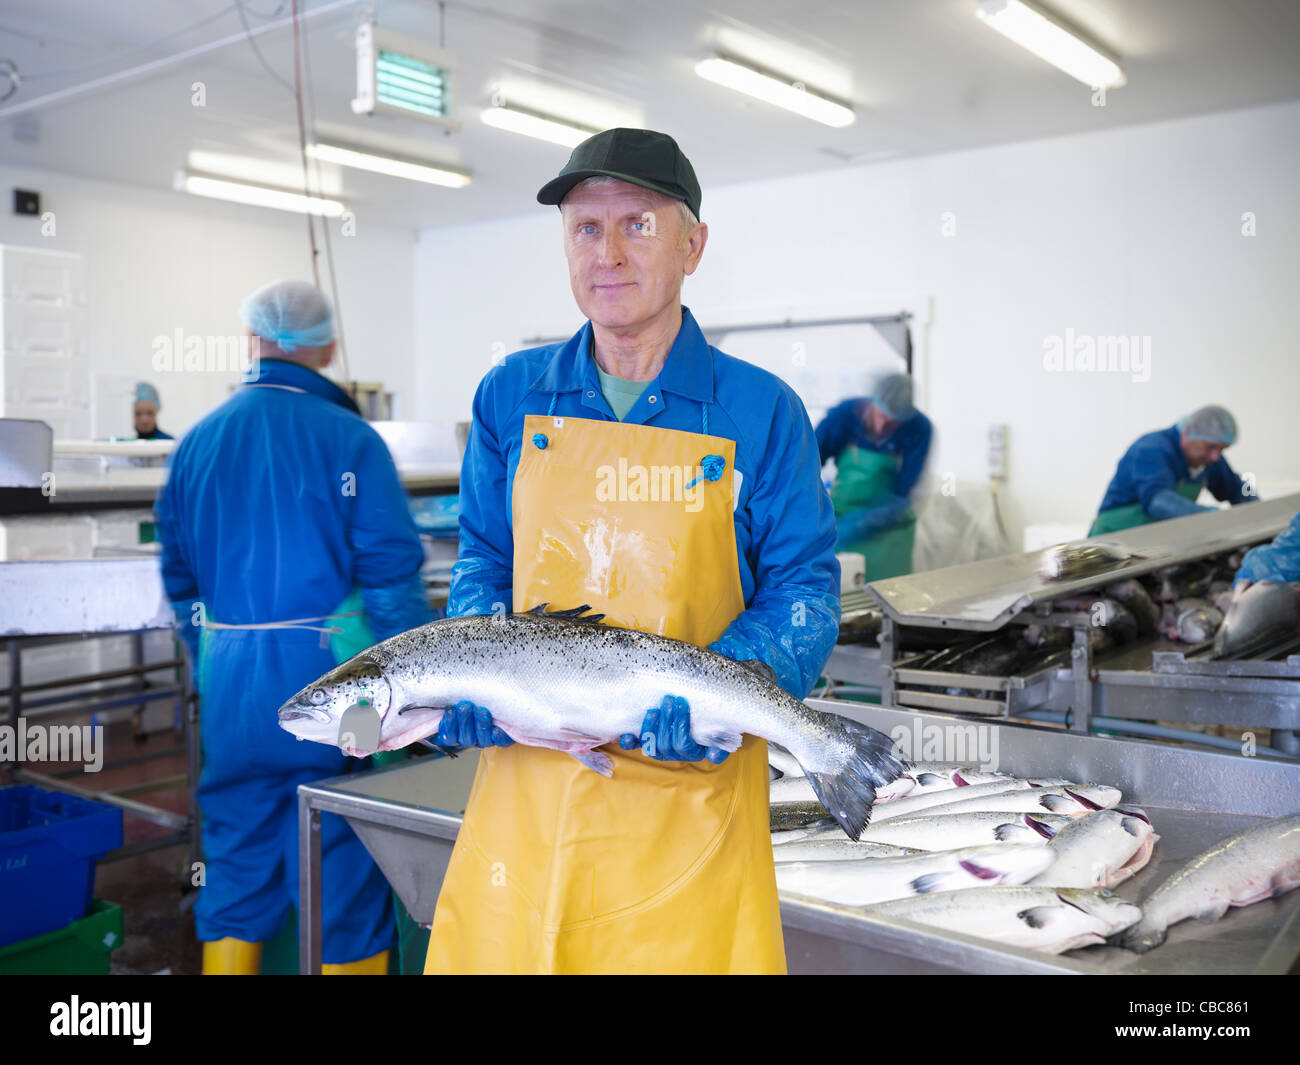 Fishmonger holding catch of the day Stock Photo